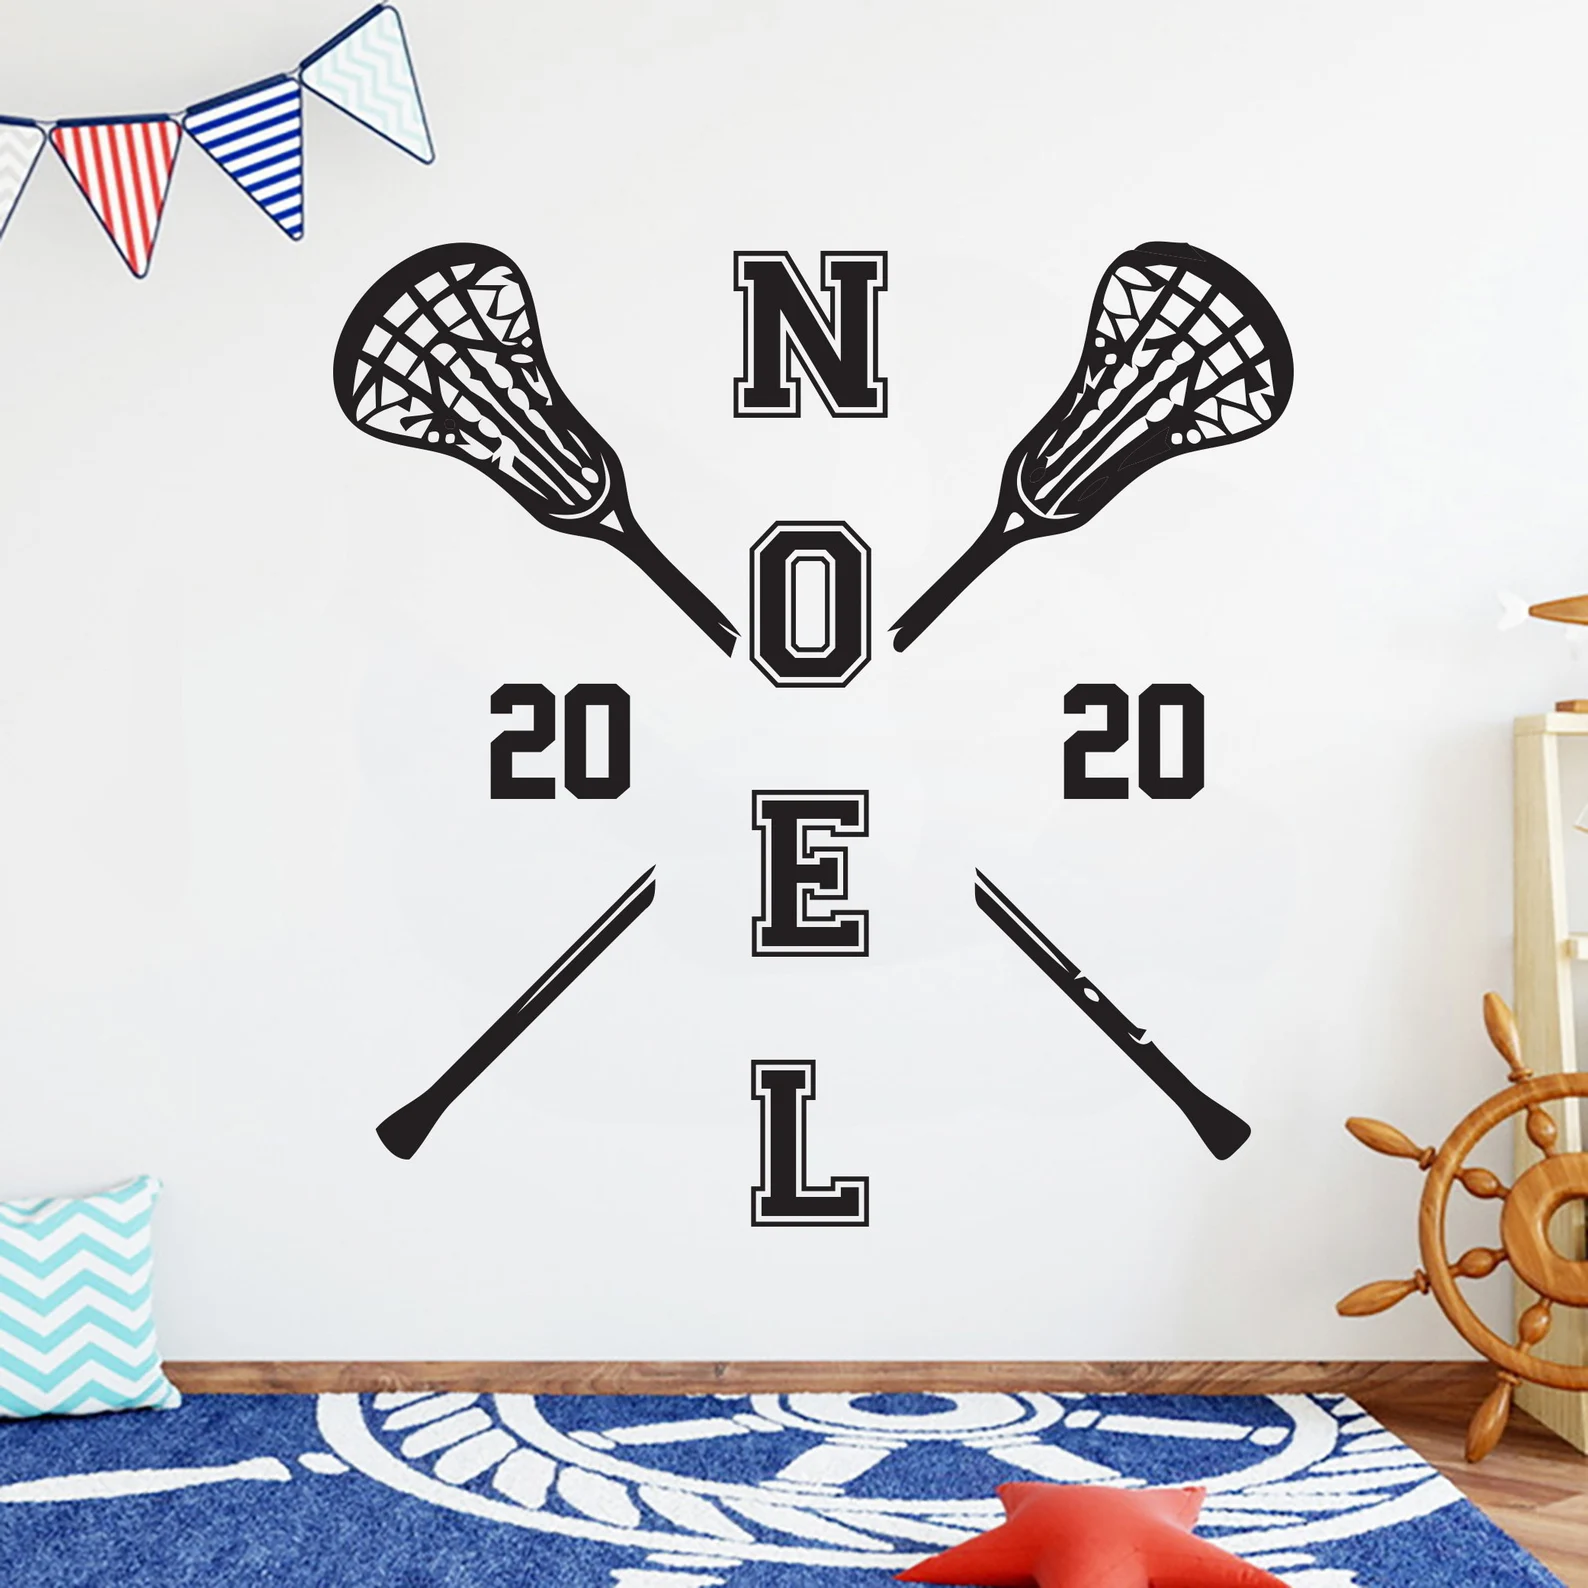 A lacrosse stick decal can be enjoyed every day by your lax player. Order yours at this Etsy shop: StickersanddecalsArt.